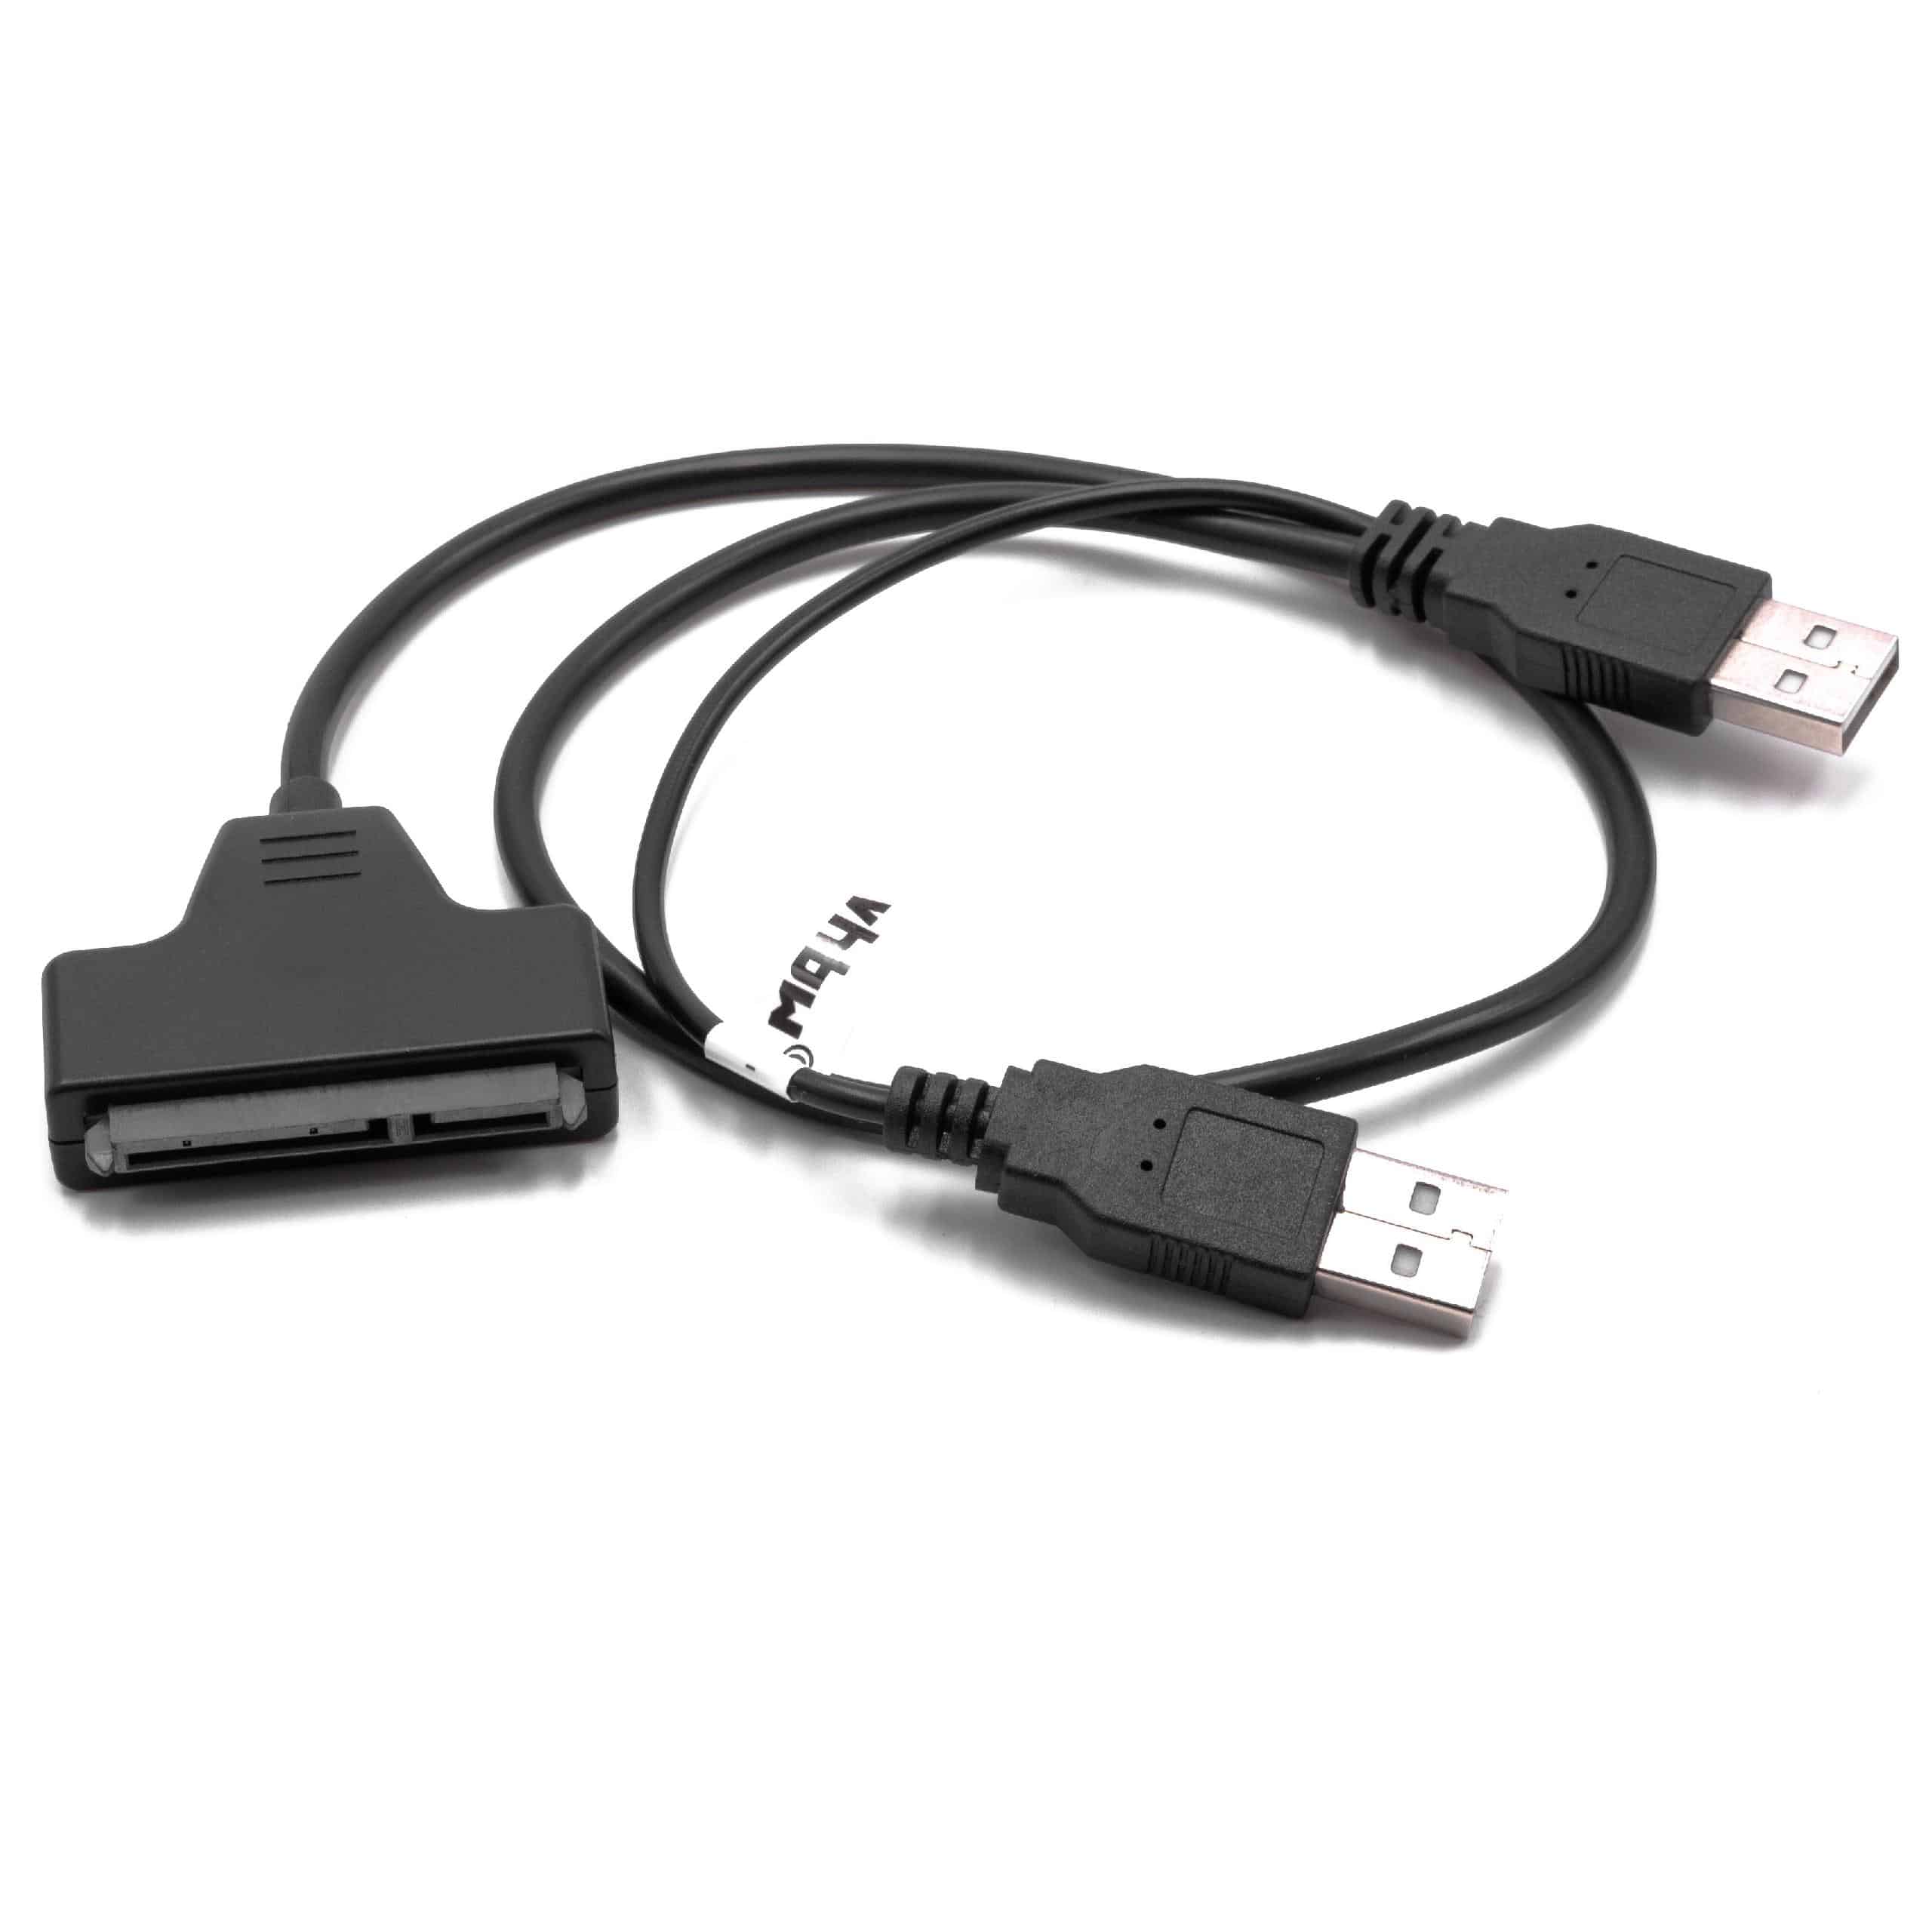 SATA to USB External Hard Drive Adapter Cable for HDD External Hard Drives, Plug-and-Play black